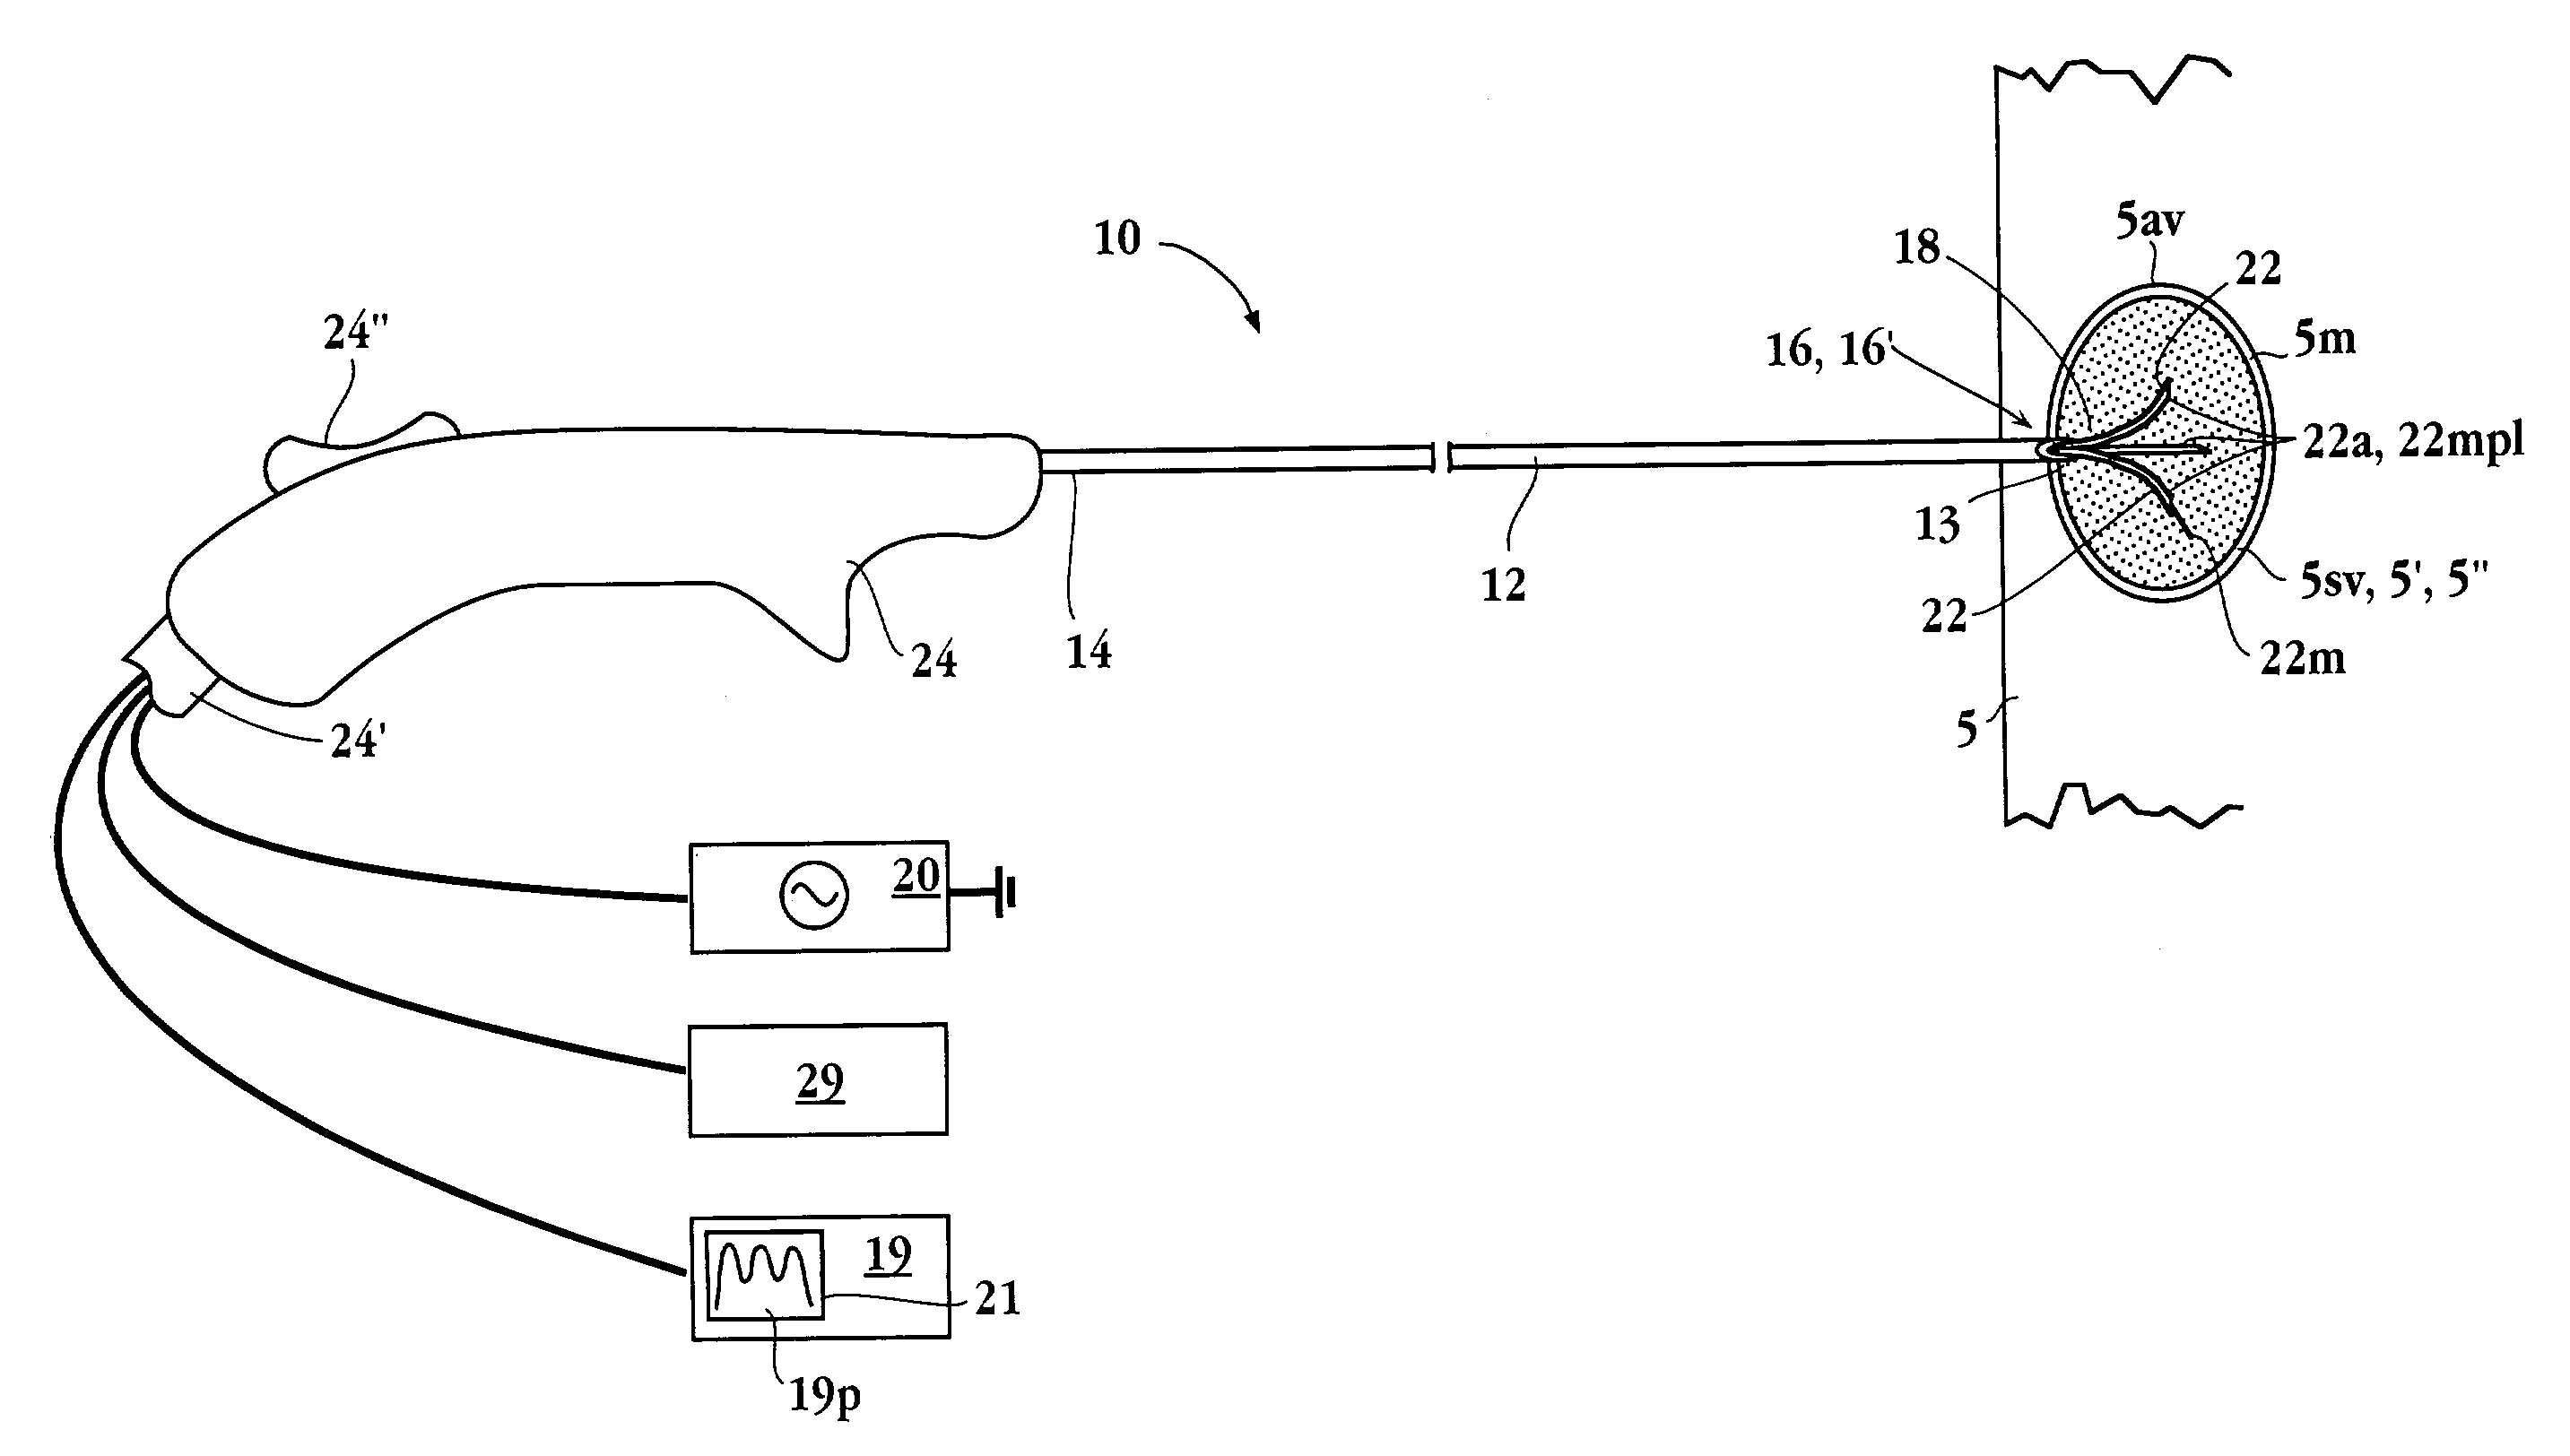 Apparatus for detecting and treating tumors using localized impedance measurement